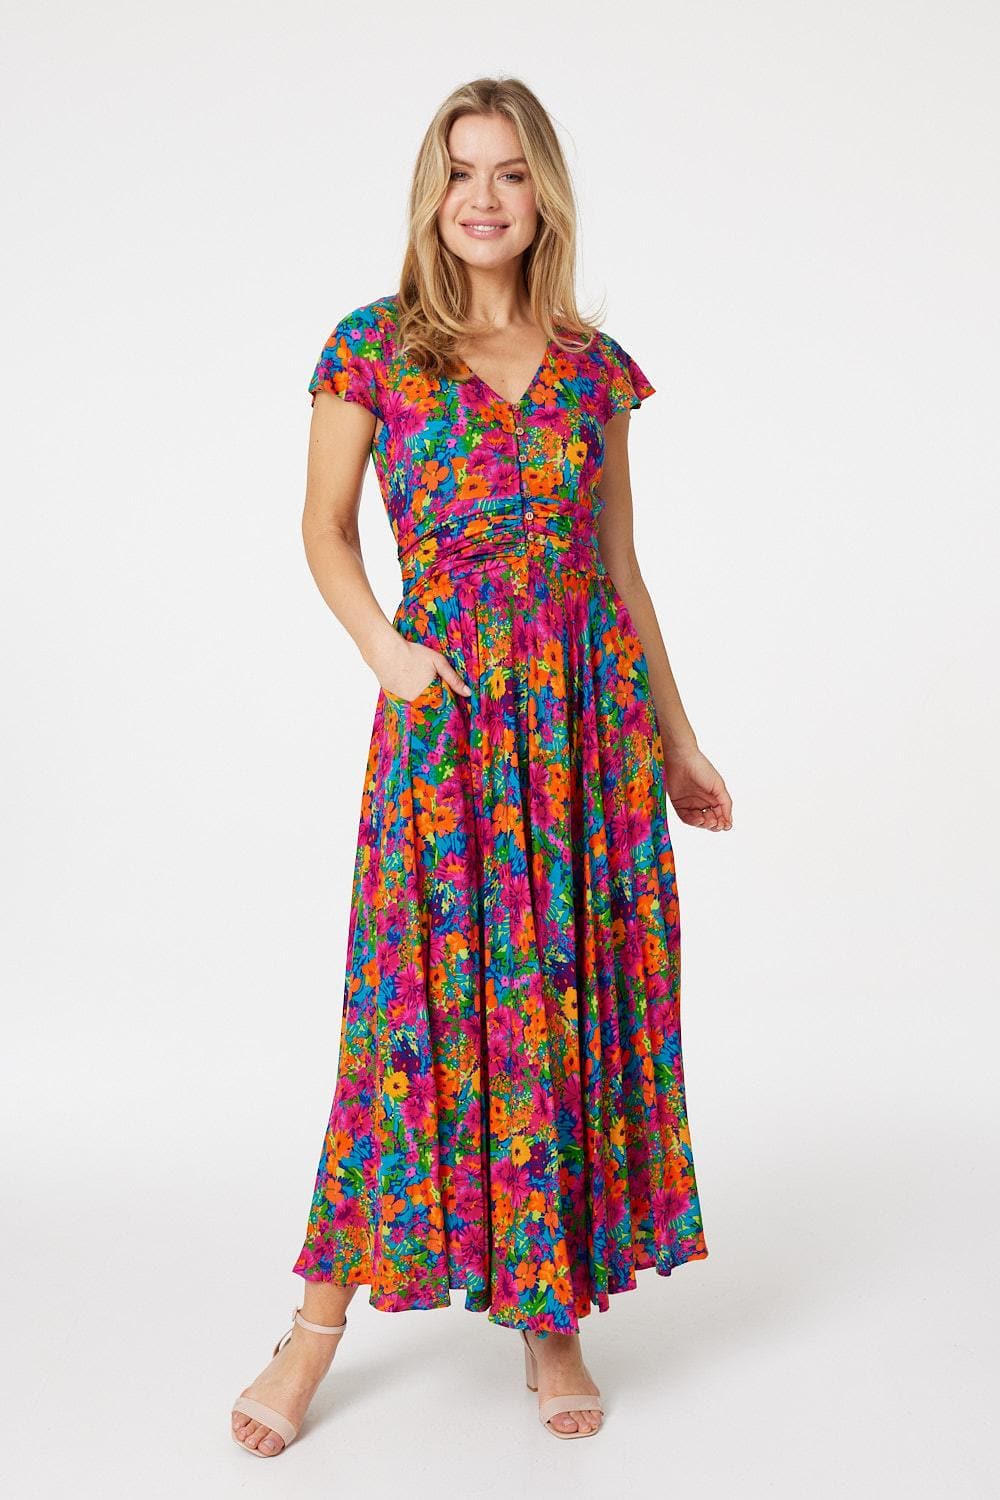 Pink | Floral Ruched Front Maxi Dress : Model is 5'10"/178 cm and wears UK8/EU36/US4/AUS8